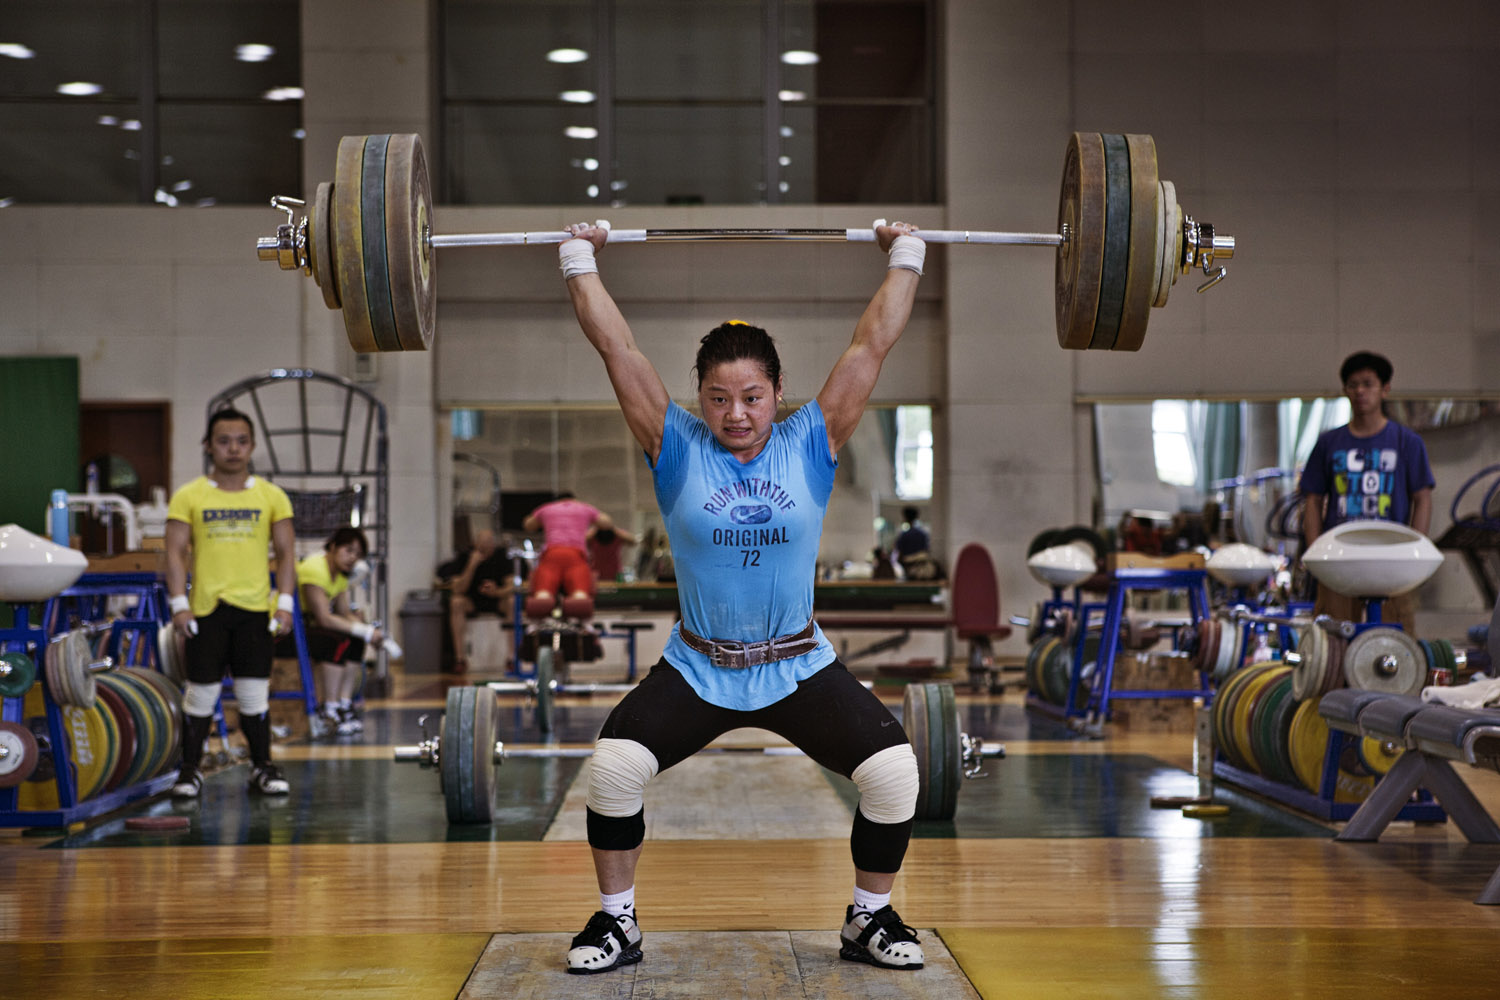 Li Xueying shows her enormous power during a successful lift while training for the Chinese women's Olympic weight-lifting team.